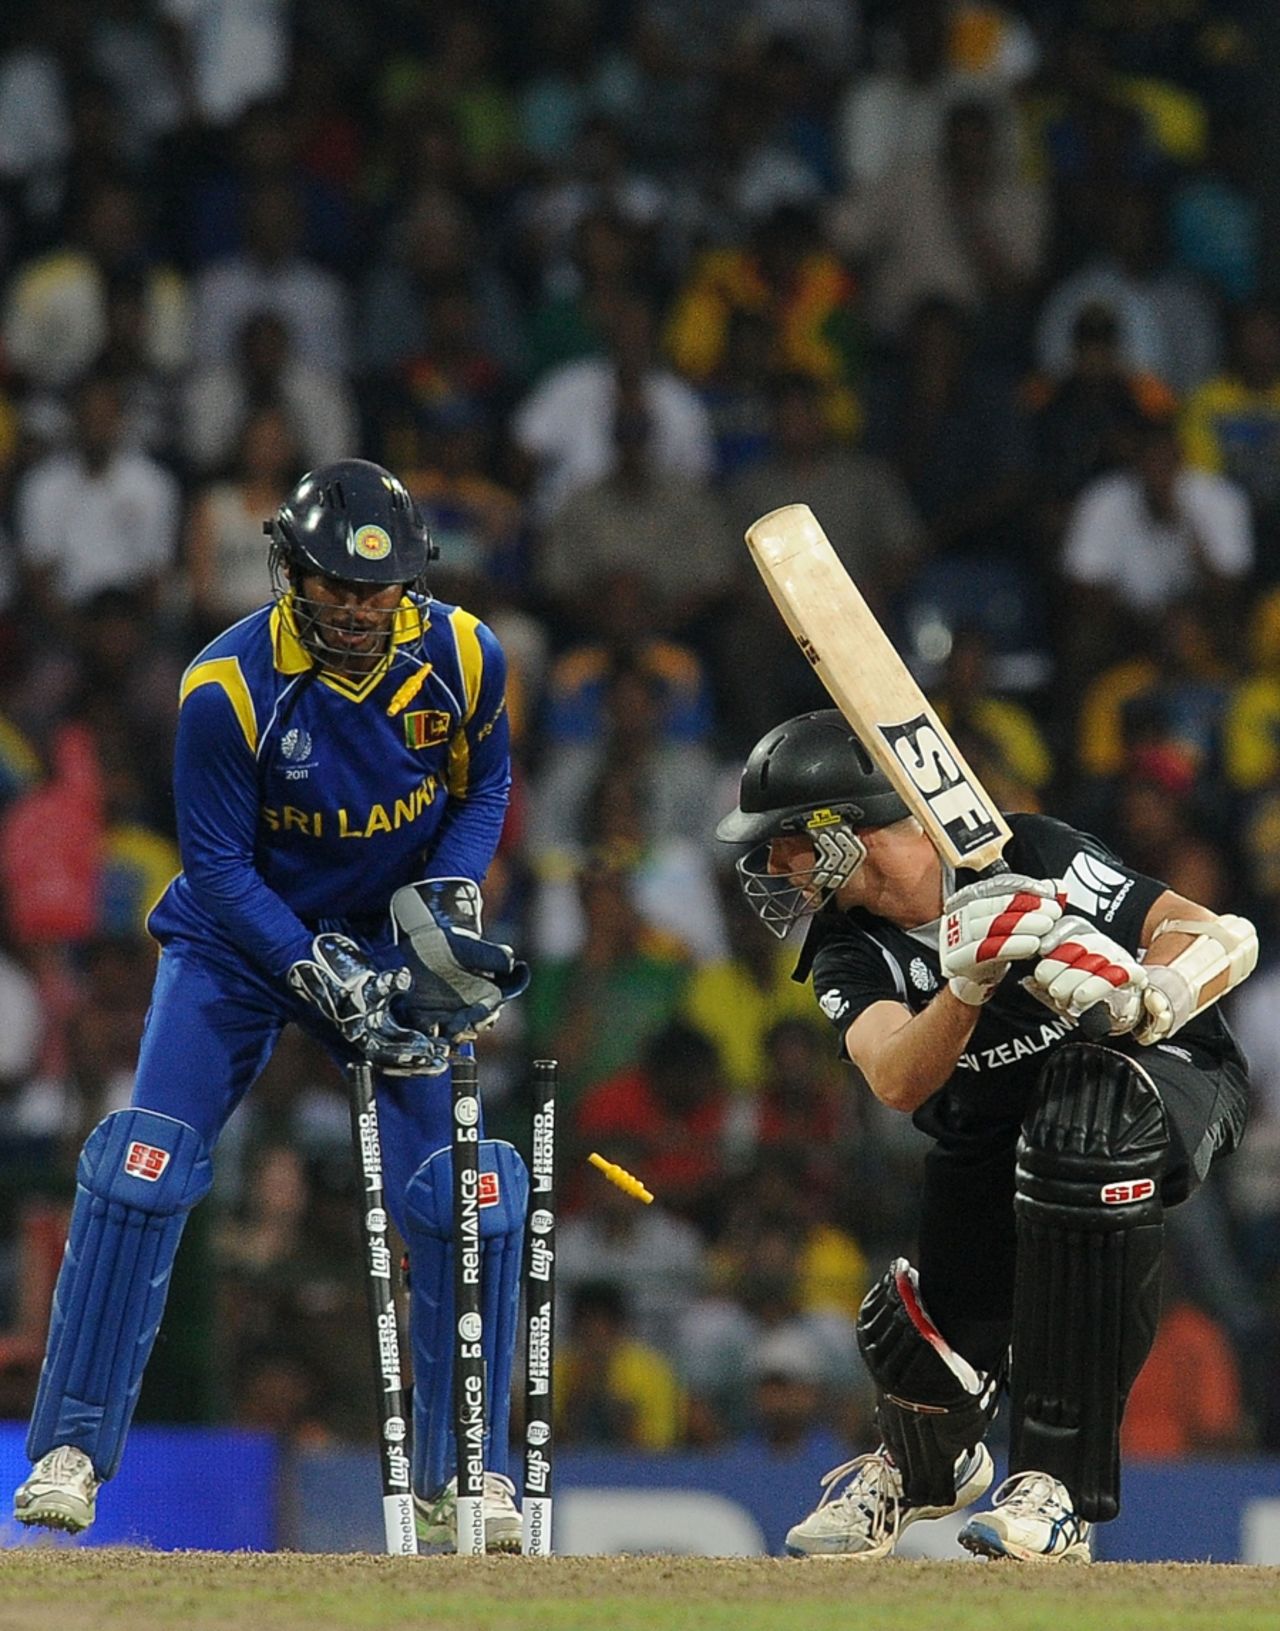 Andy McKay, New Zealand's No. 11, was bowled by Ajantha Mendis to end the innings, Sri Lanka v New Zealand, 1st semi-final, World Cup 2011, Colombo, March 29, 2011